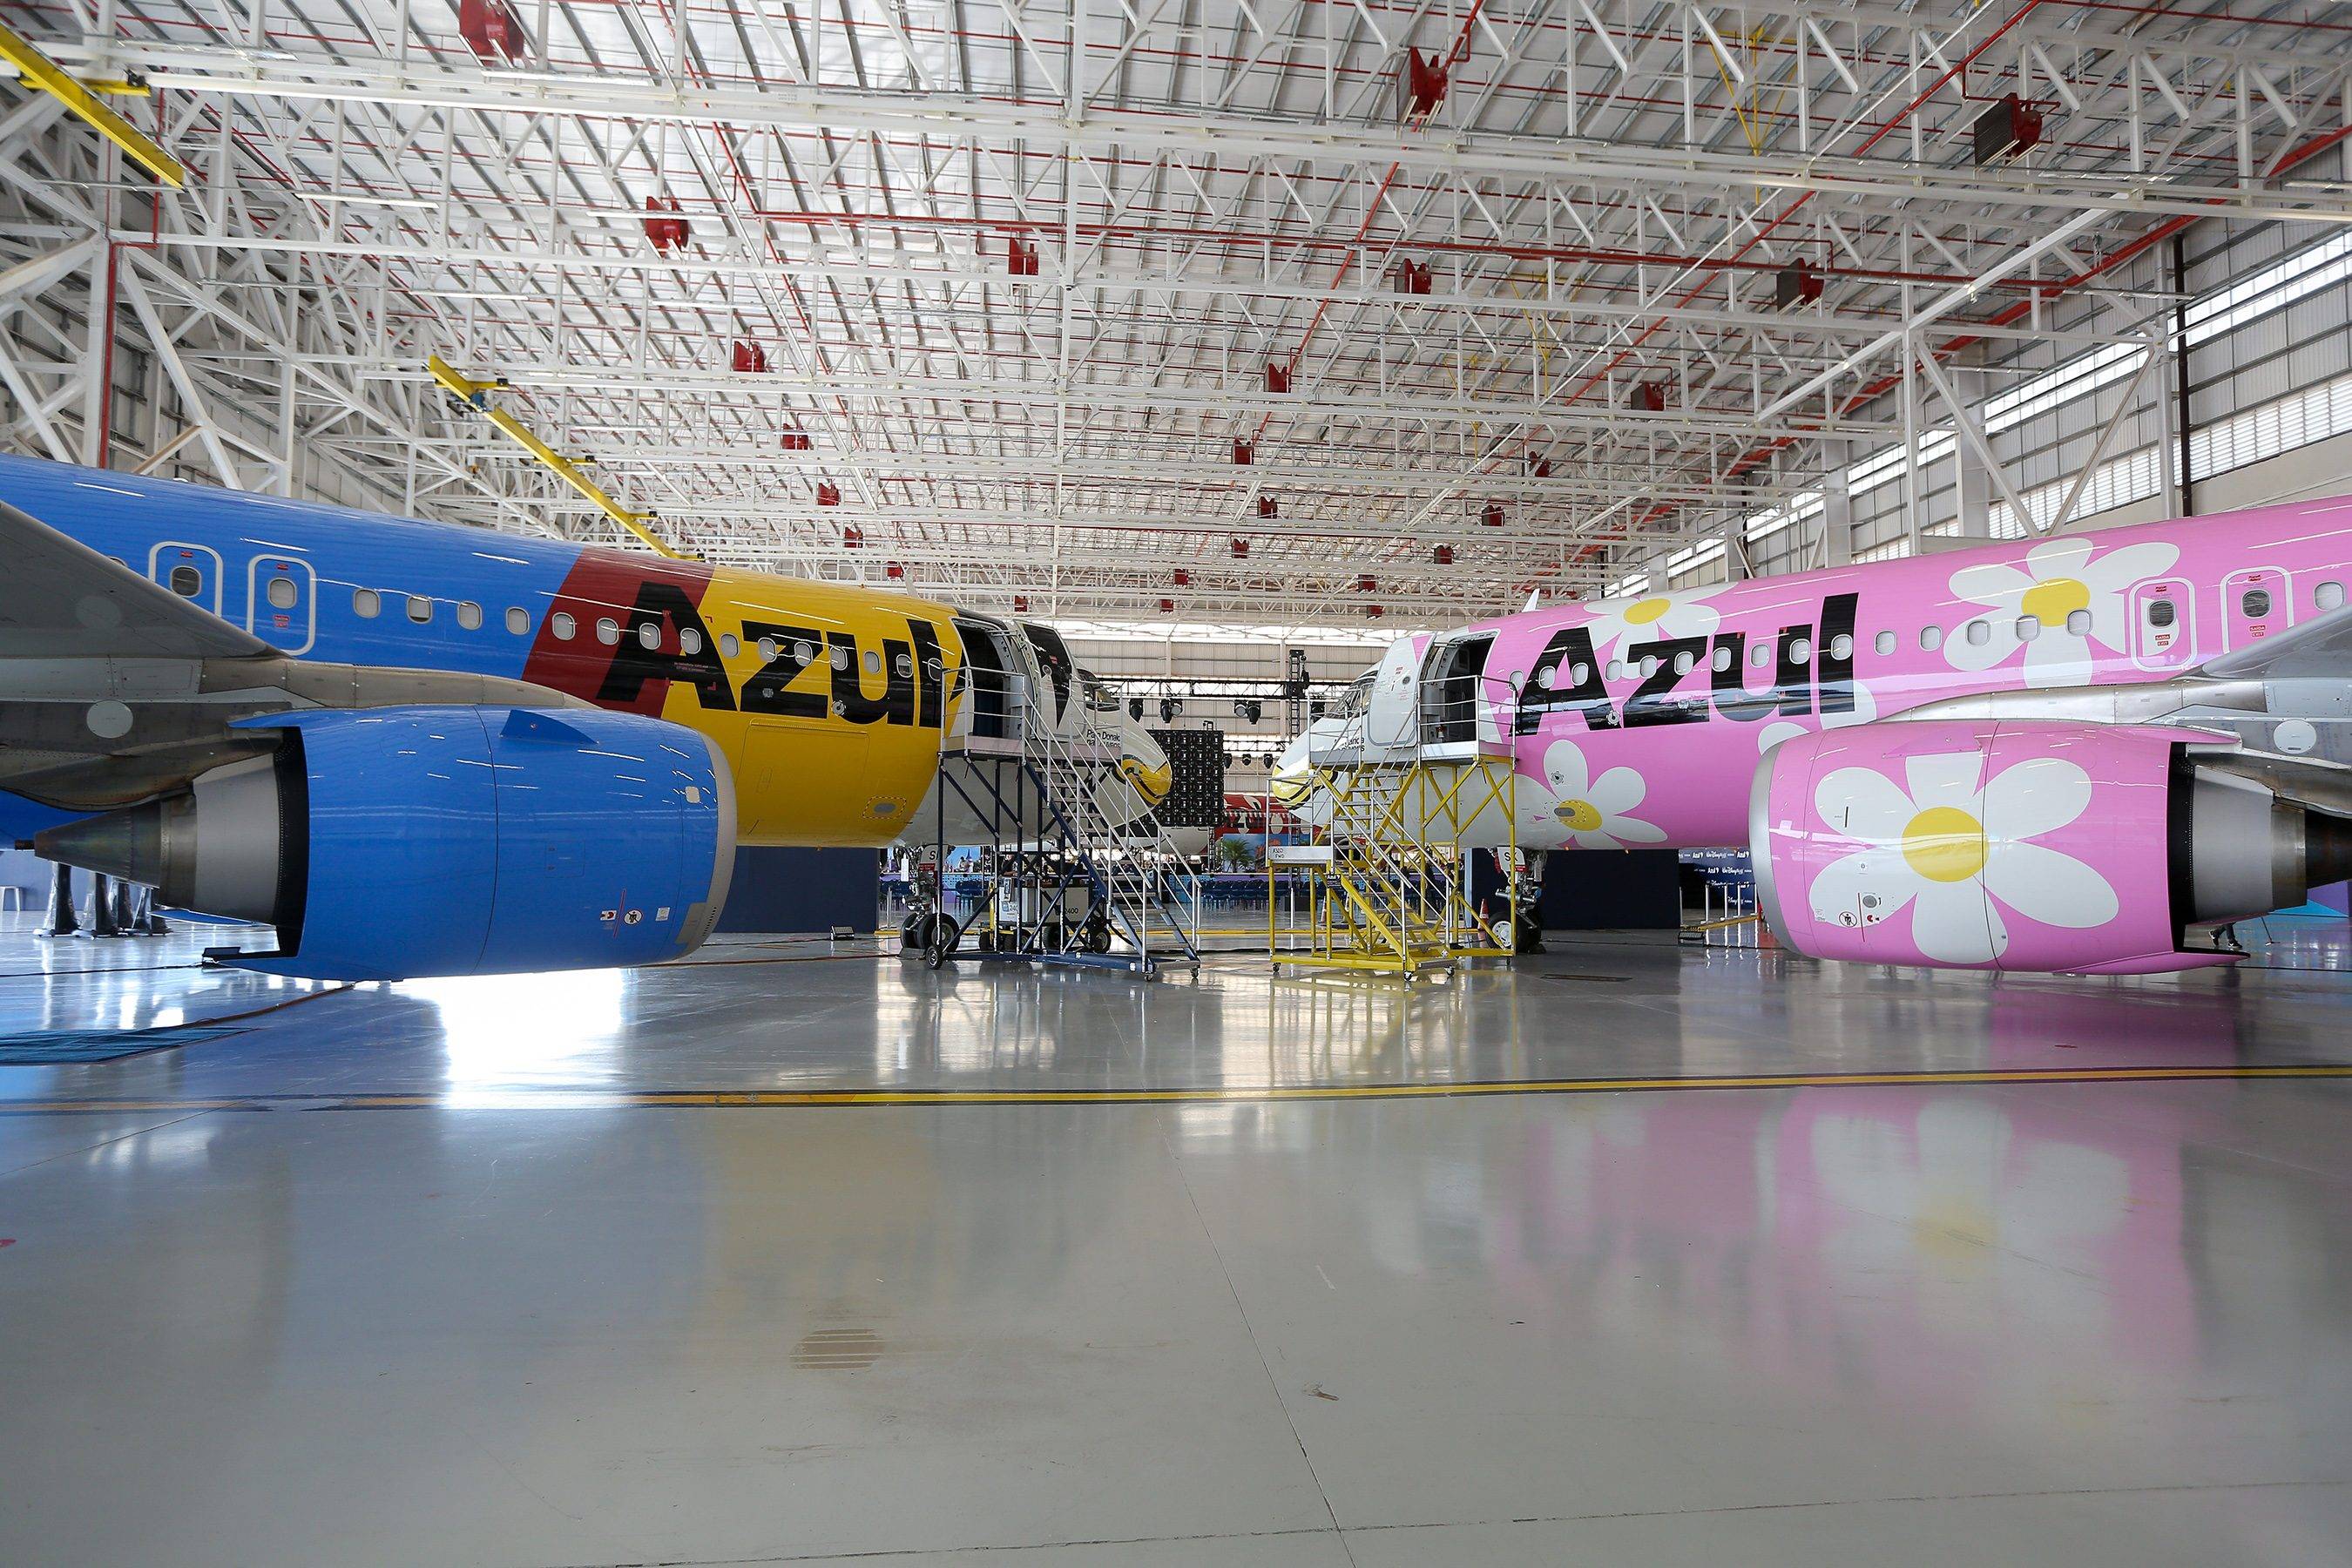 Donald Duck and Daisy Duck inspired airplanes meet for the first time at Azul Airlines hangar in Campinas, Brazil